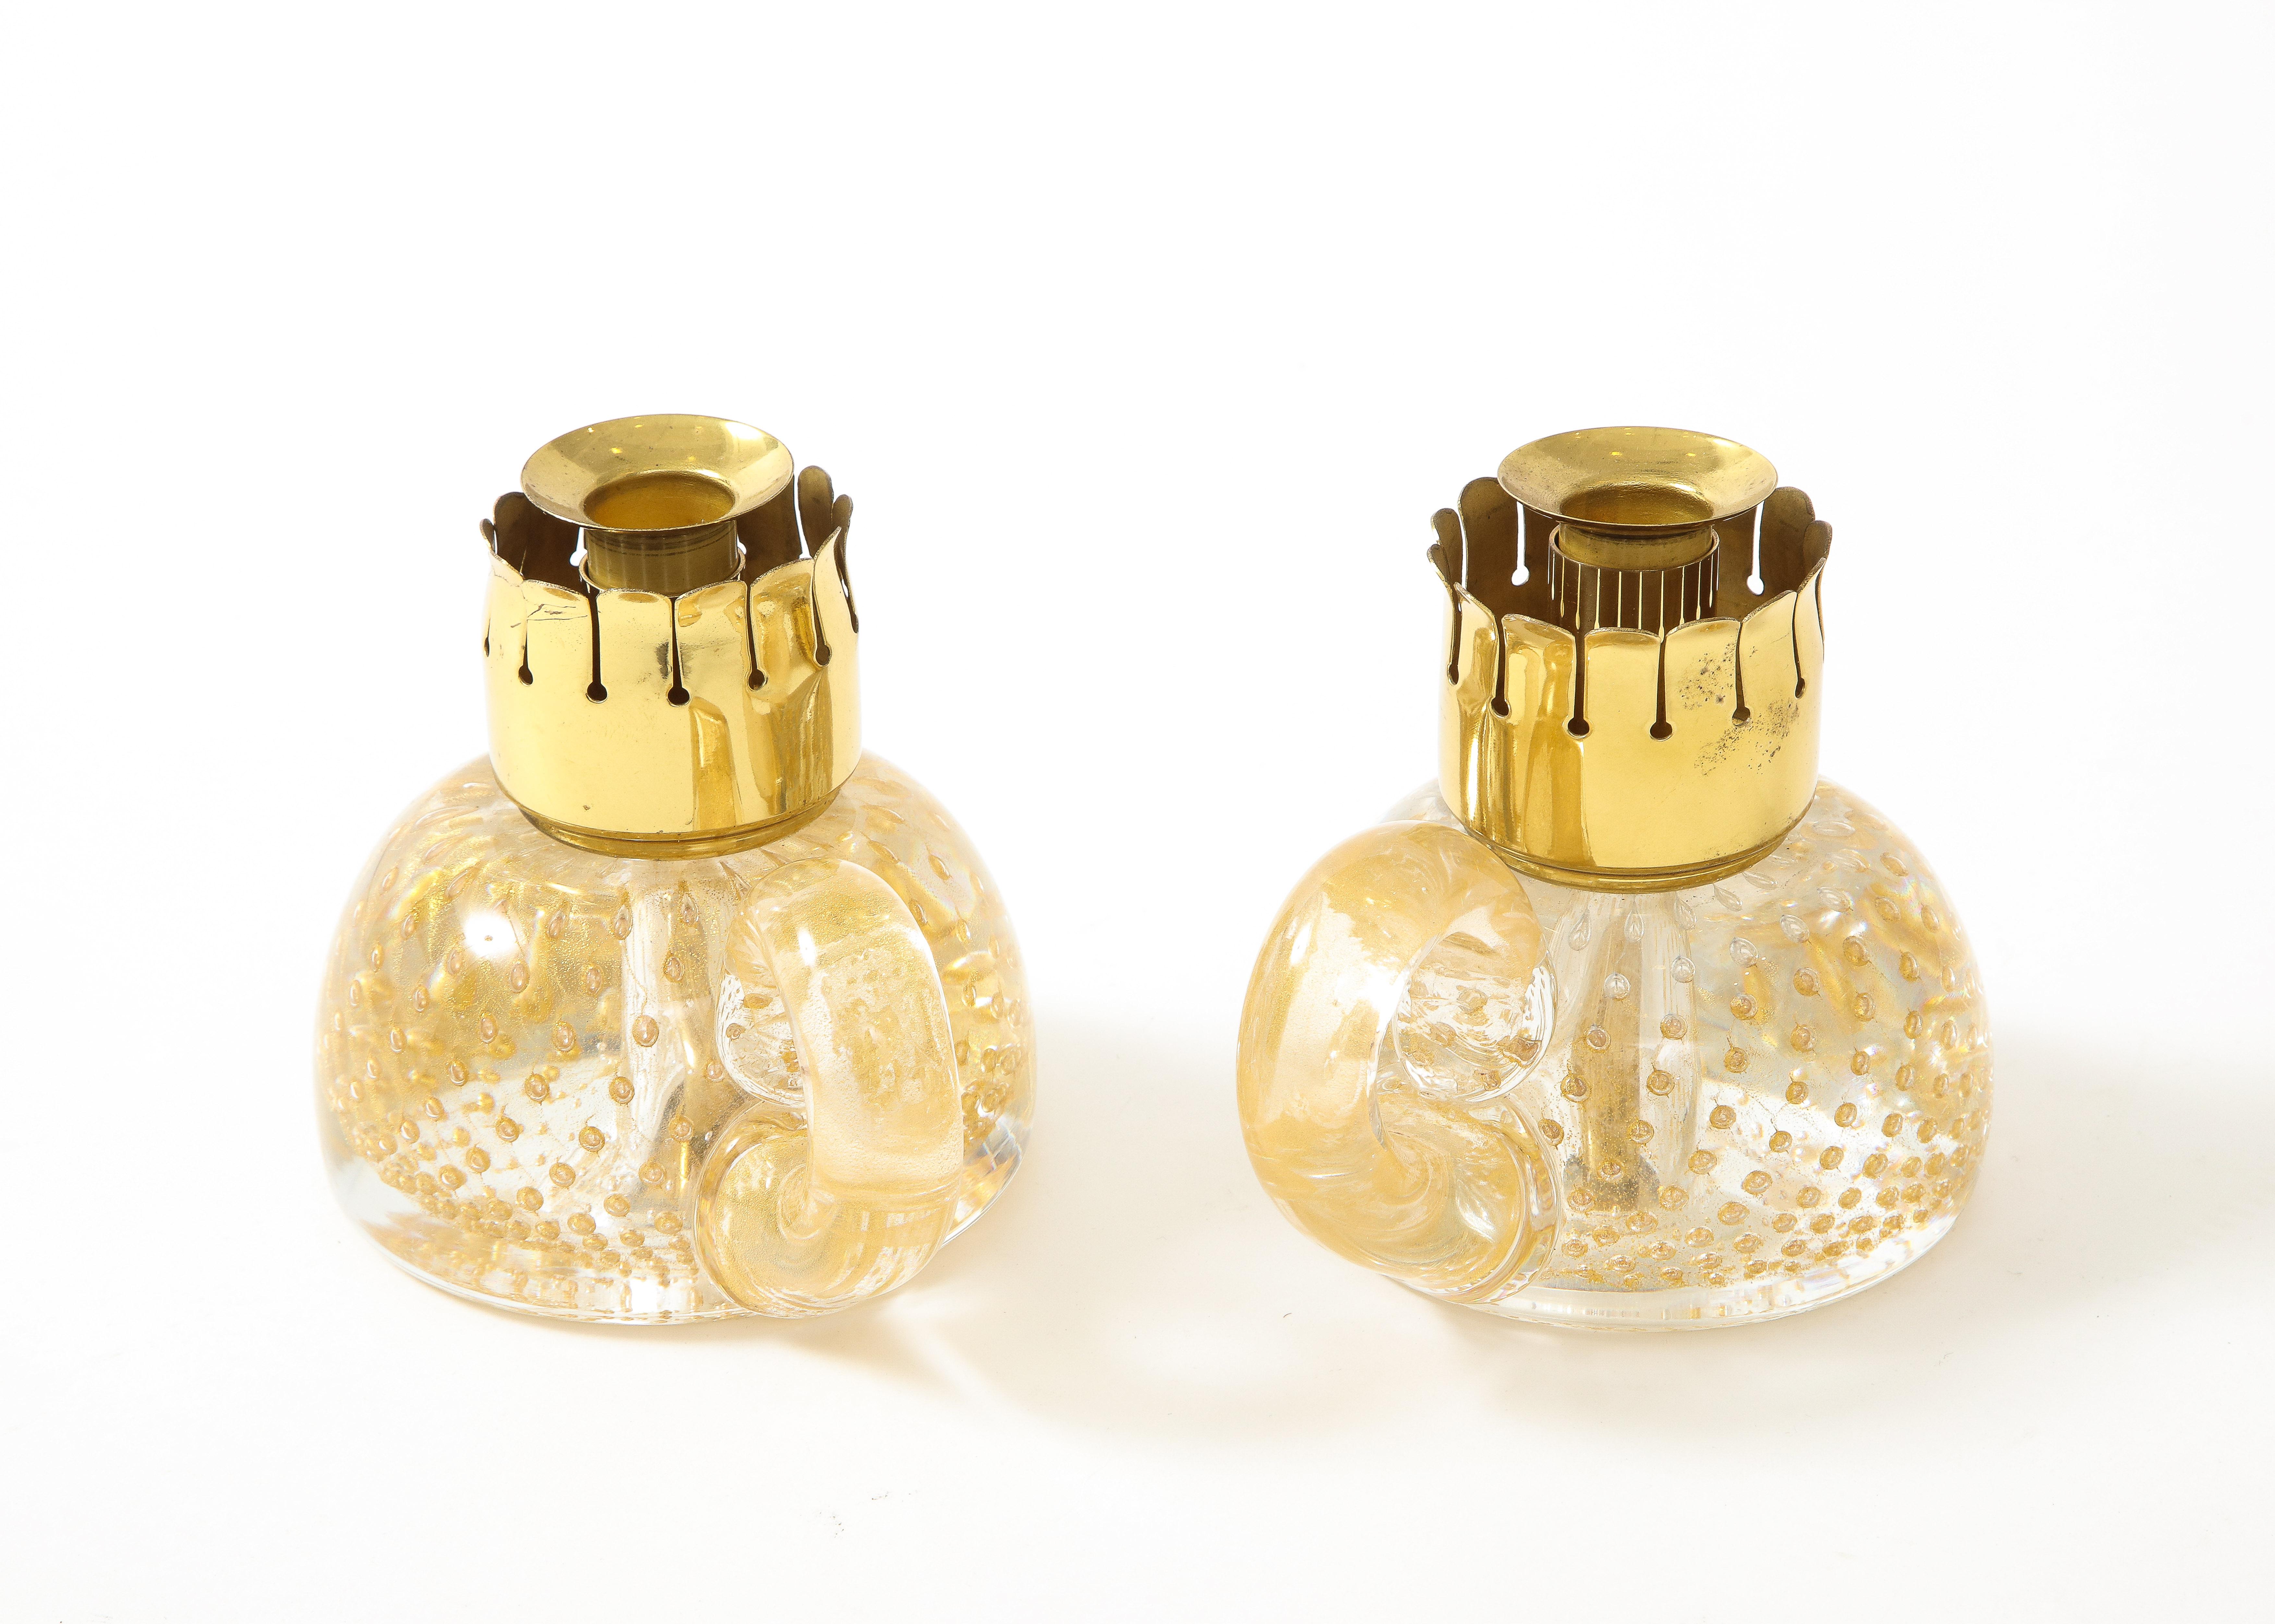 Seguso Pair of Candle Holders in Transparent Glass & Gold Leaf Inclusions, 1950s In Good Condition For Sale In New York, NY